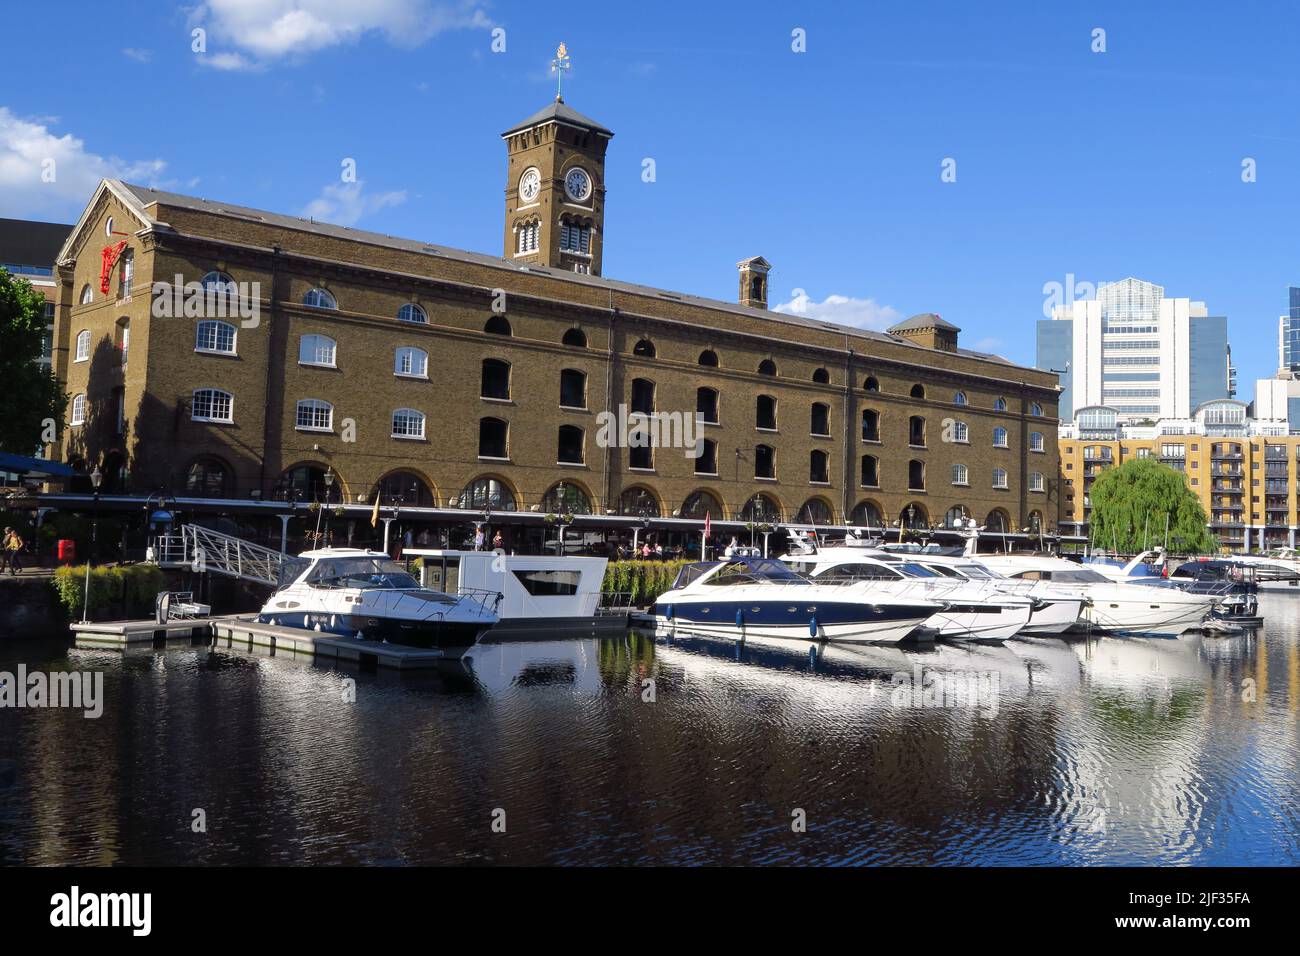 St Katharine's Dock, an historic dock now a marina close to the Tower of London. Stock Photo